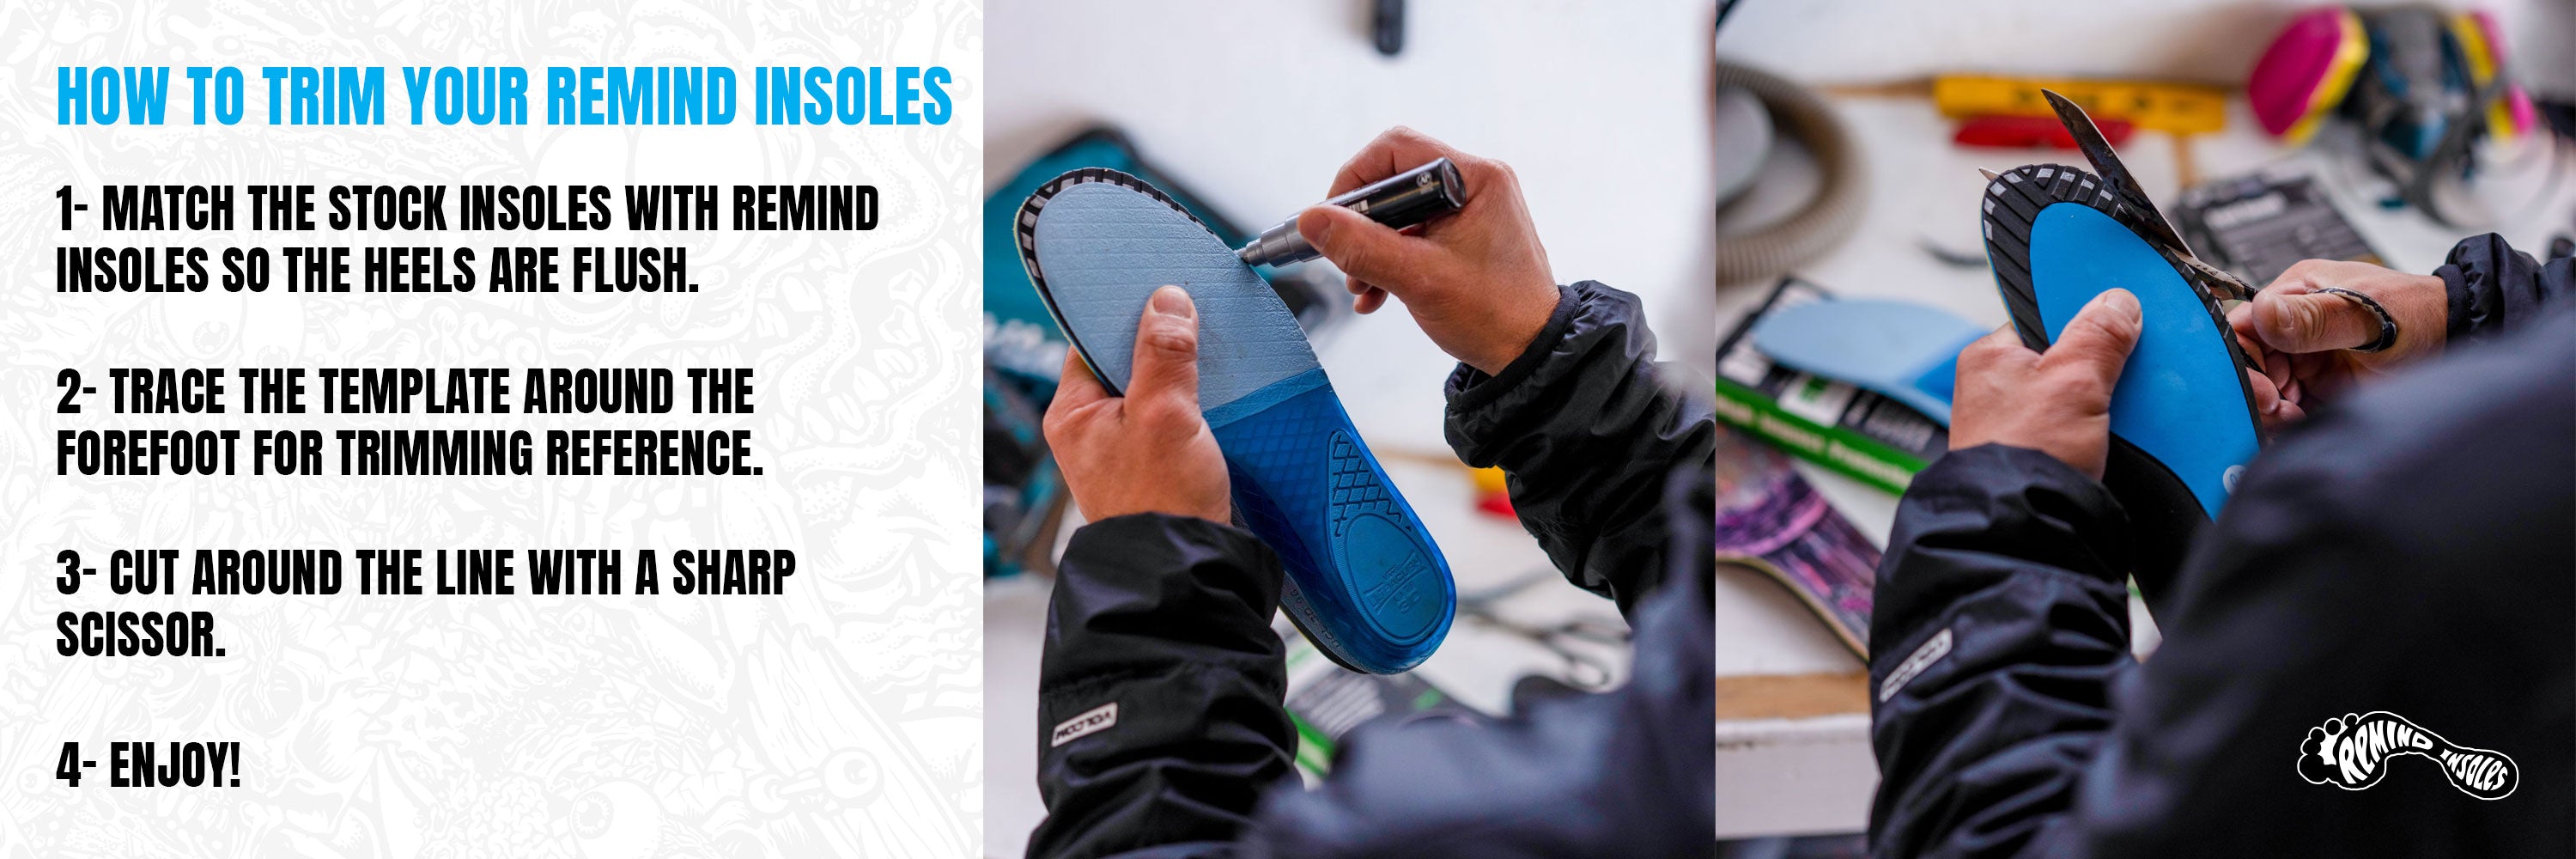 How to trim Remind Insoles